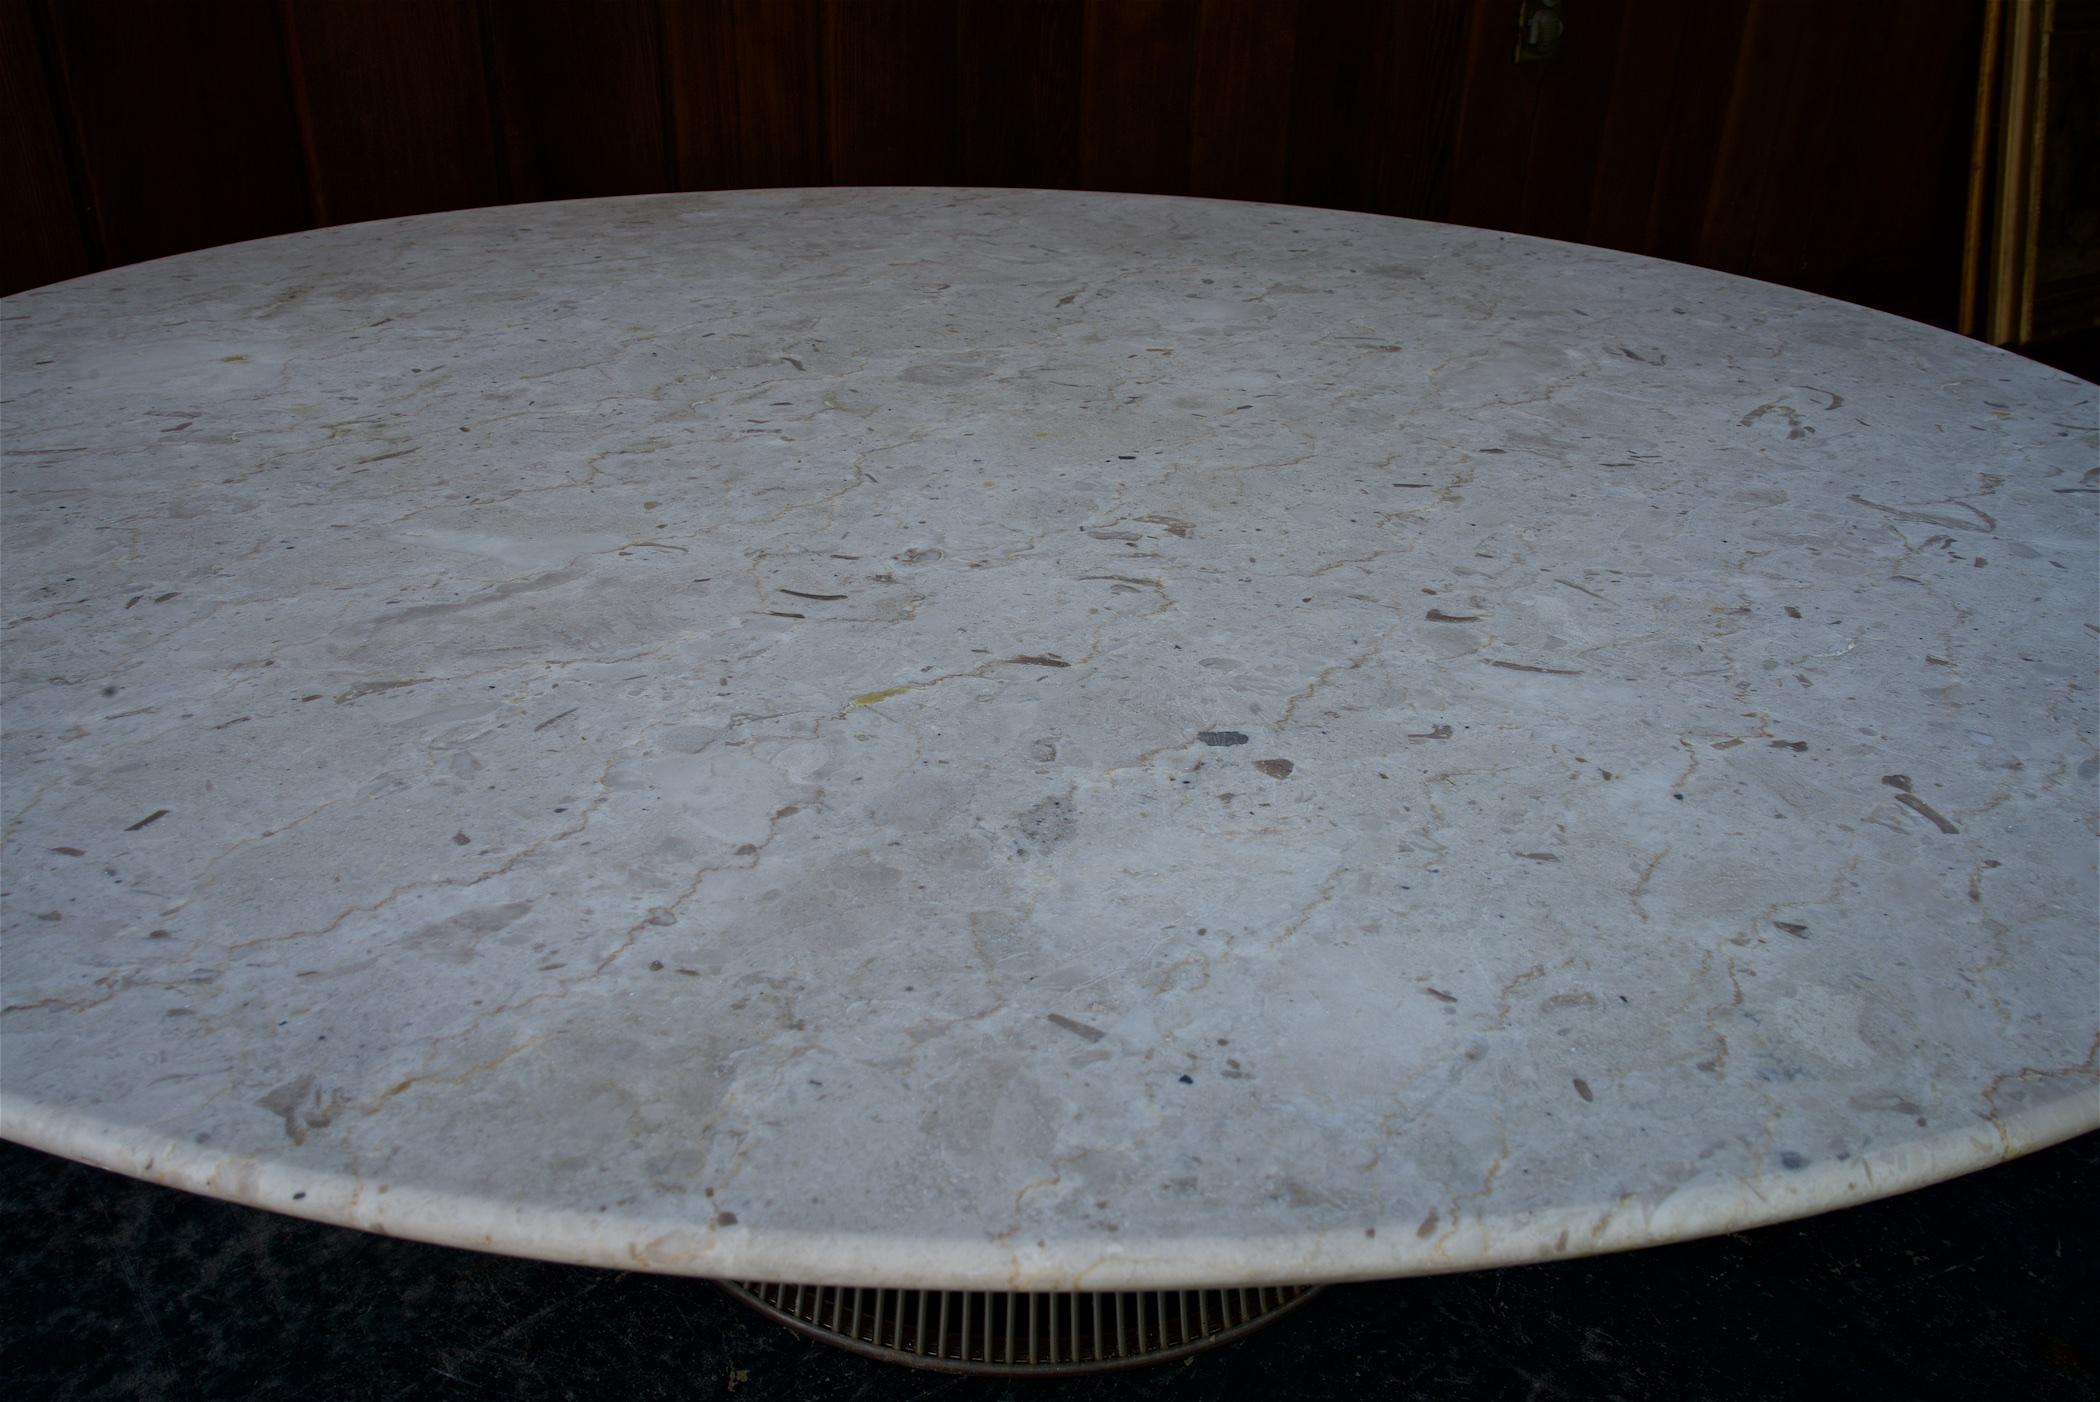 Knoll Warren Platner Marble Coffee Table Vintage 1960s Nickel Plated Cabinmodern In Fair Condition For Sale In Hyattsville, MD